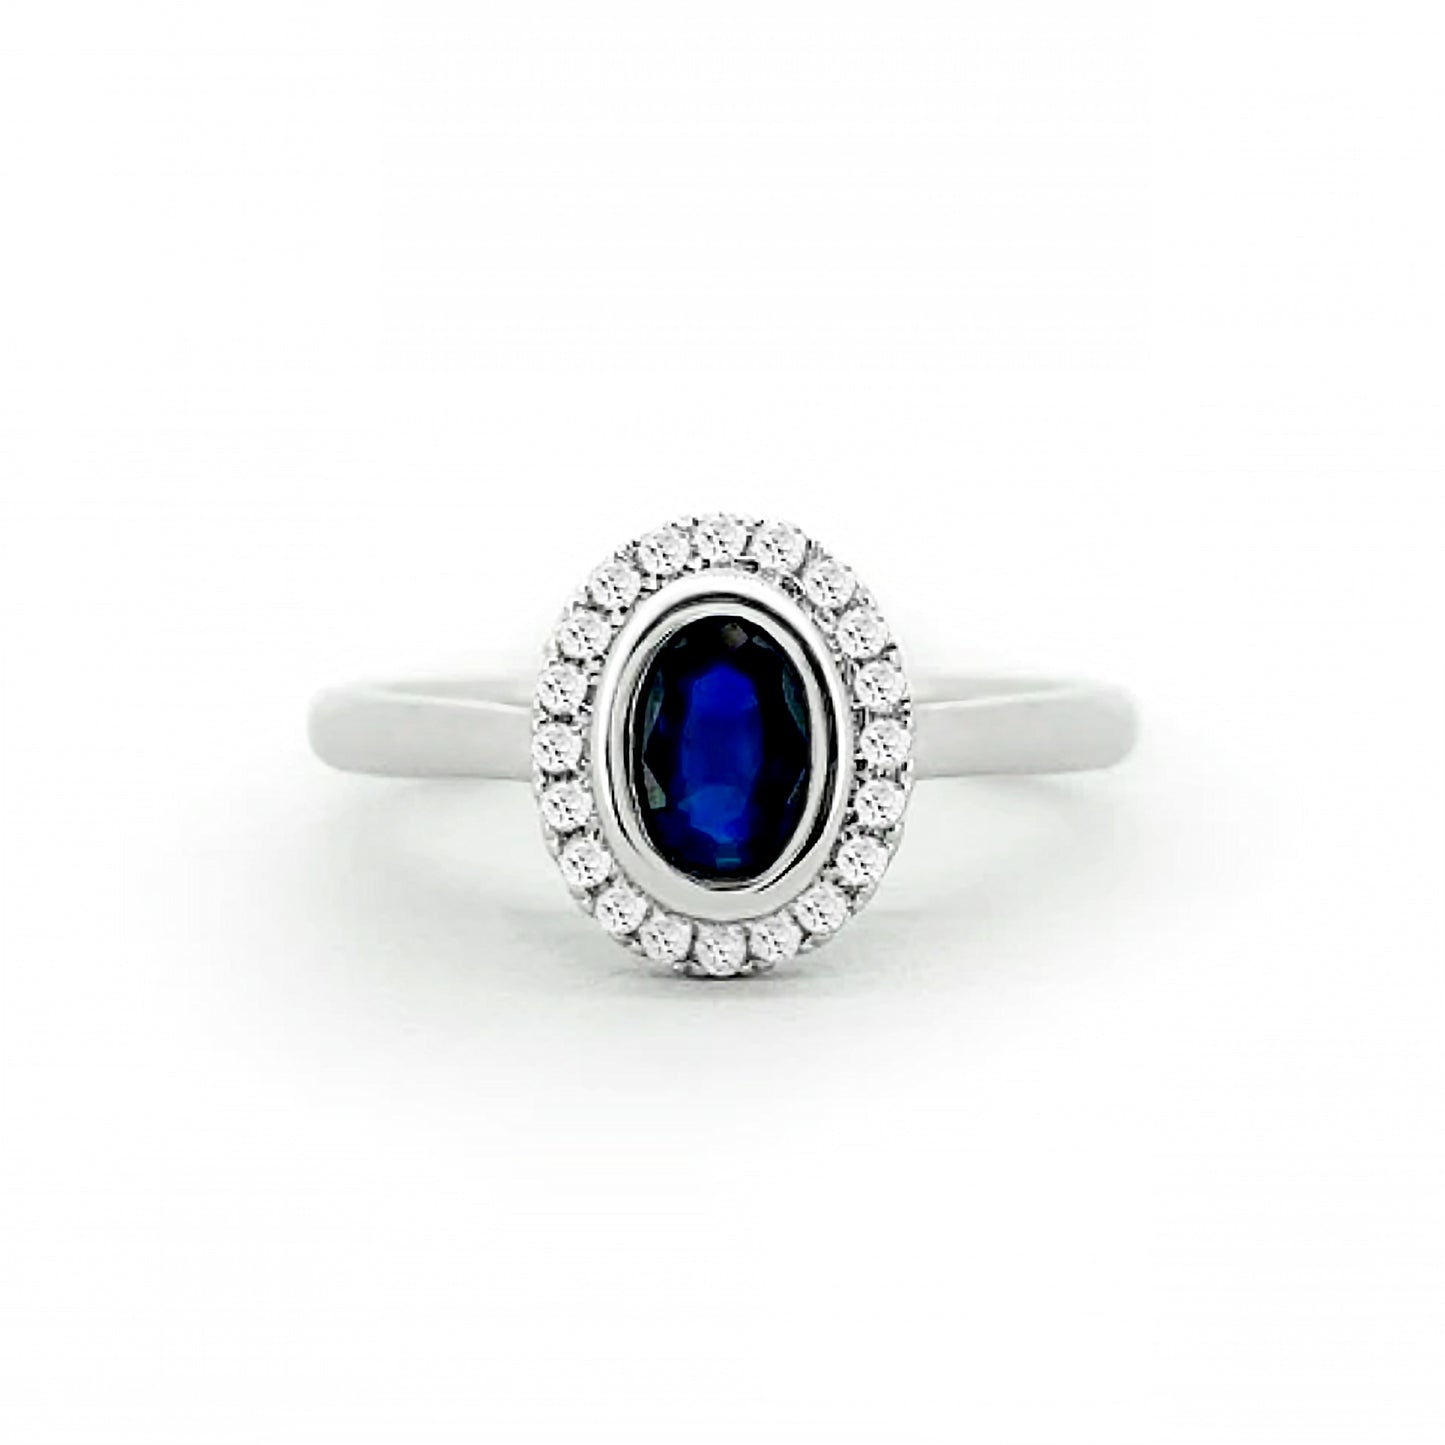 9ct White Gold Blue Sapphire and Diamond Ring